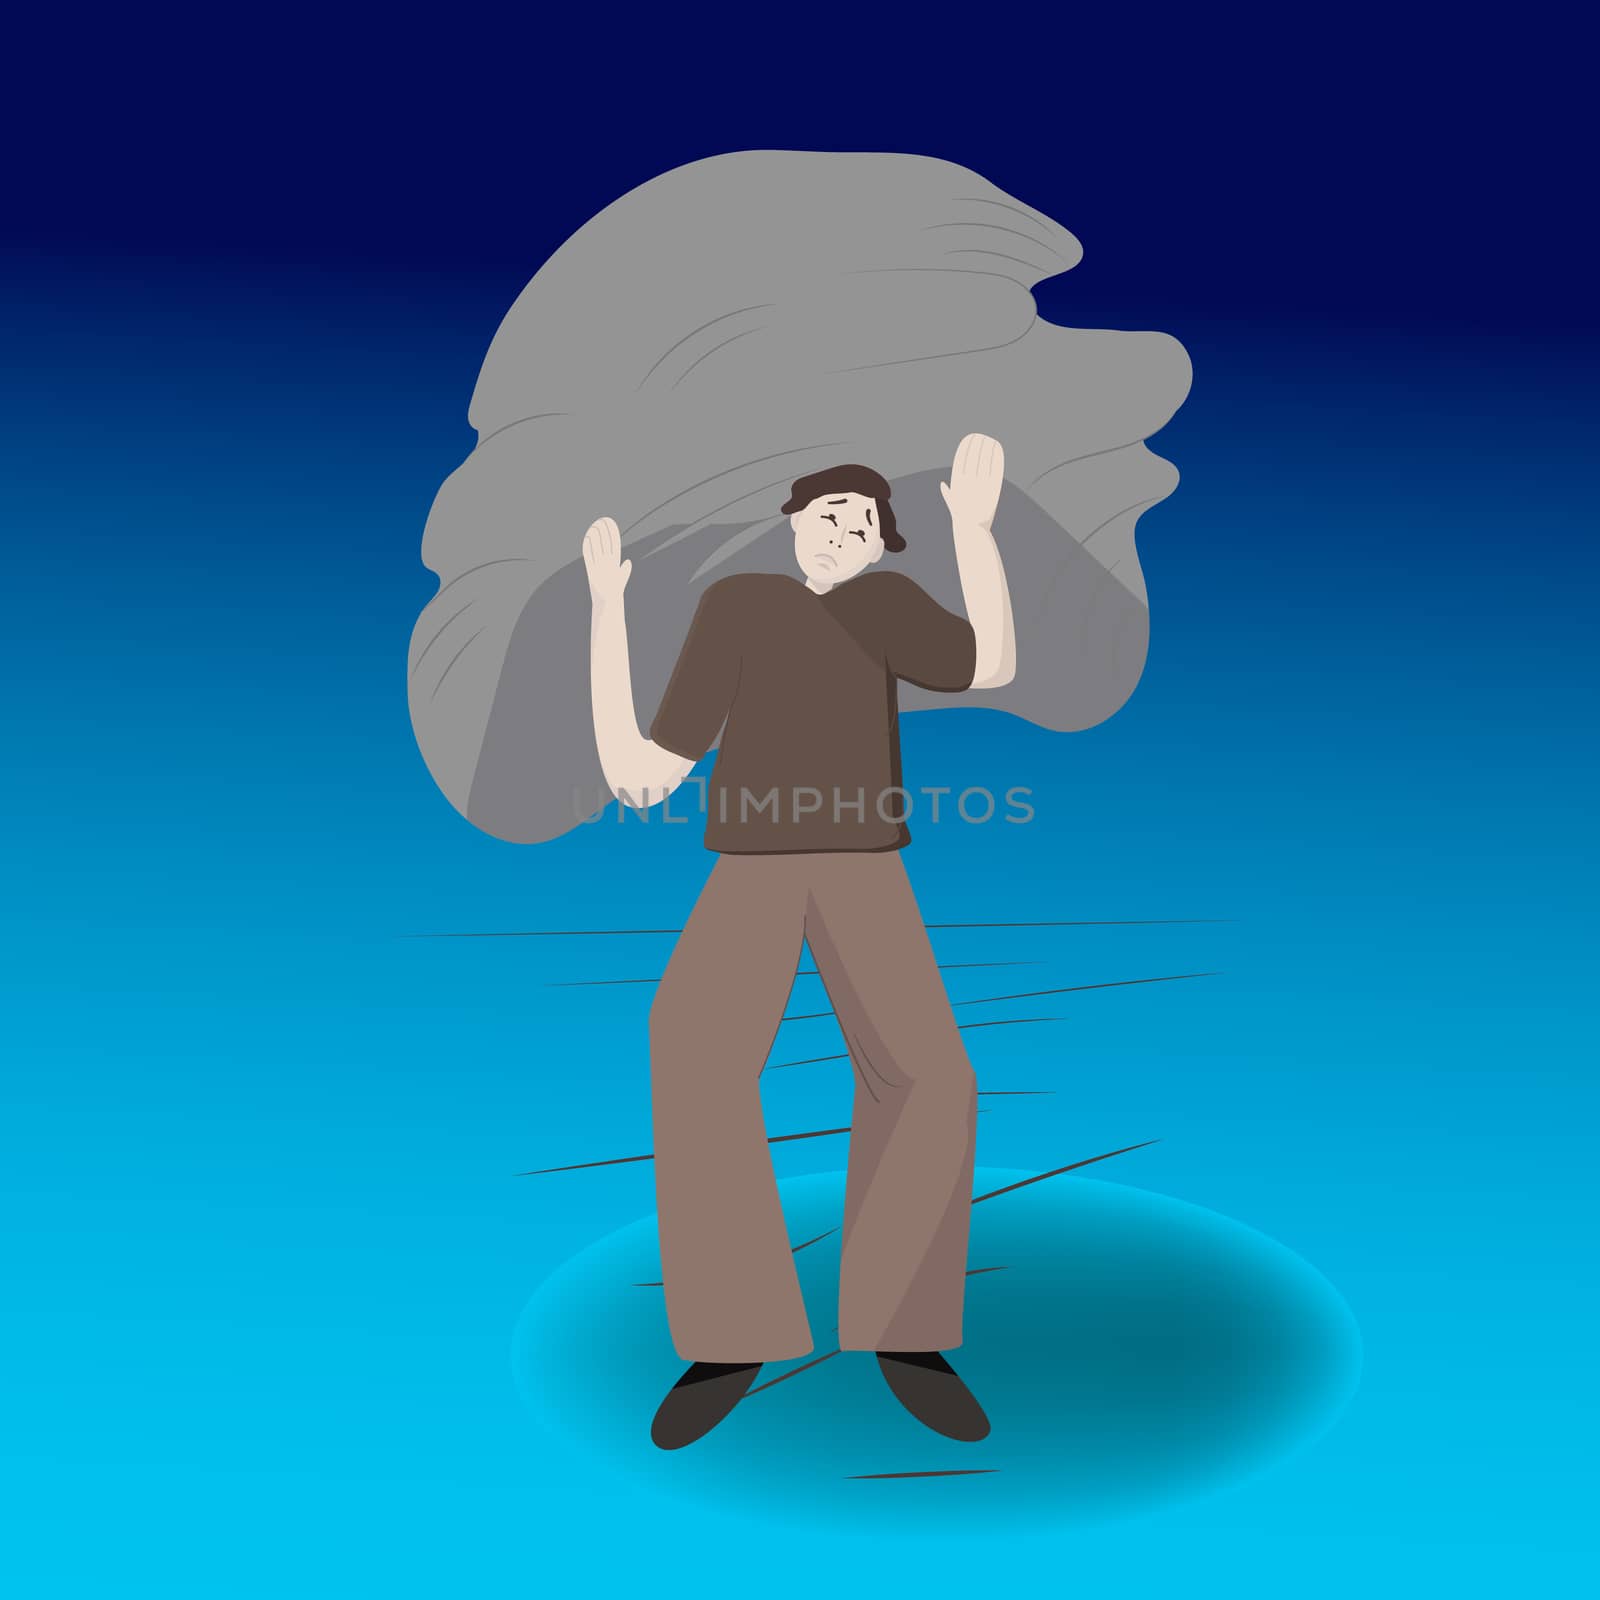 Illustration of heavy burden. Man carrying a heavy stone, emotions how hard it is to battle a stress. 